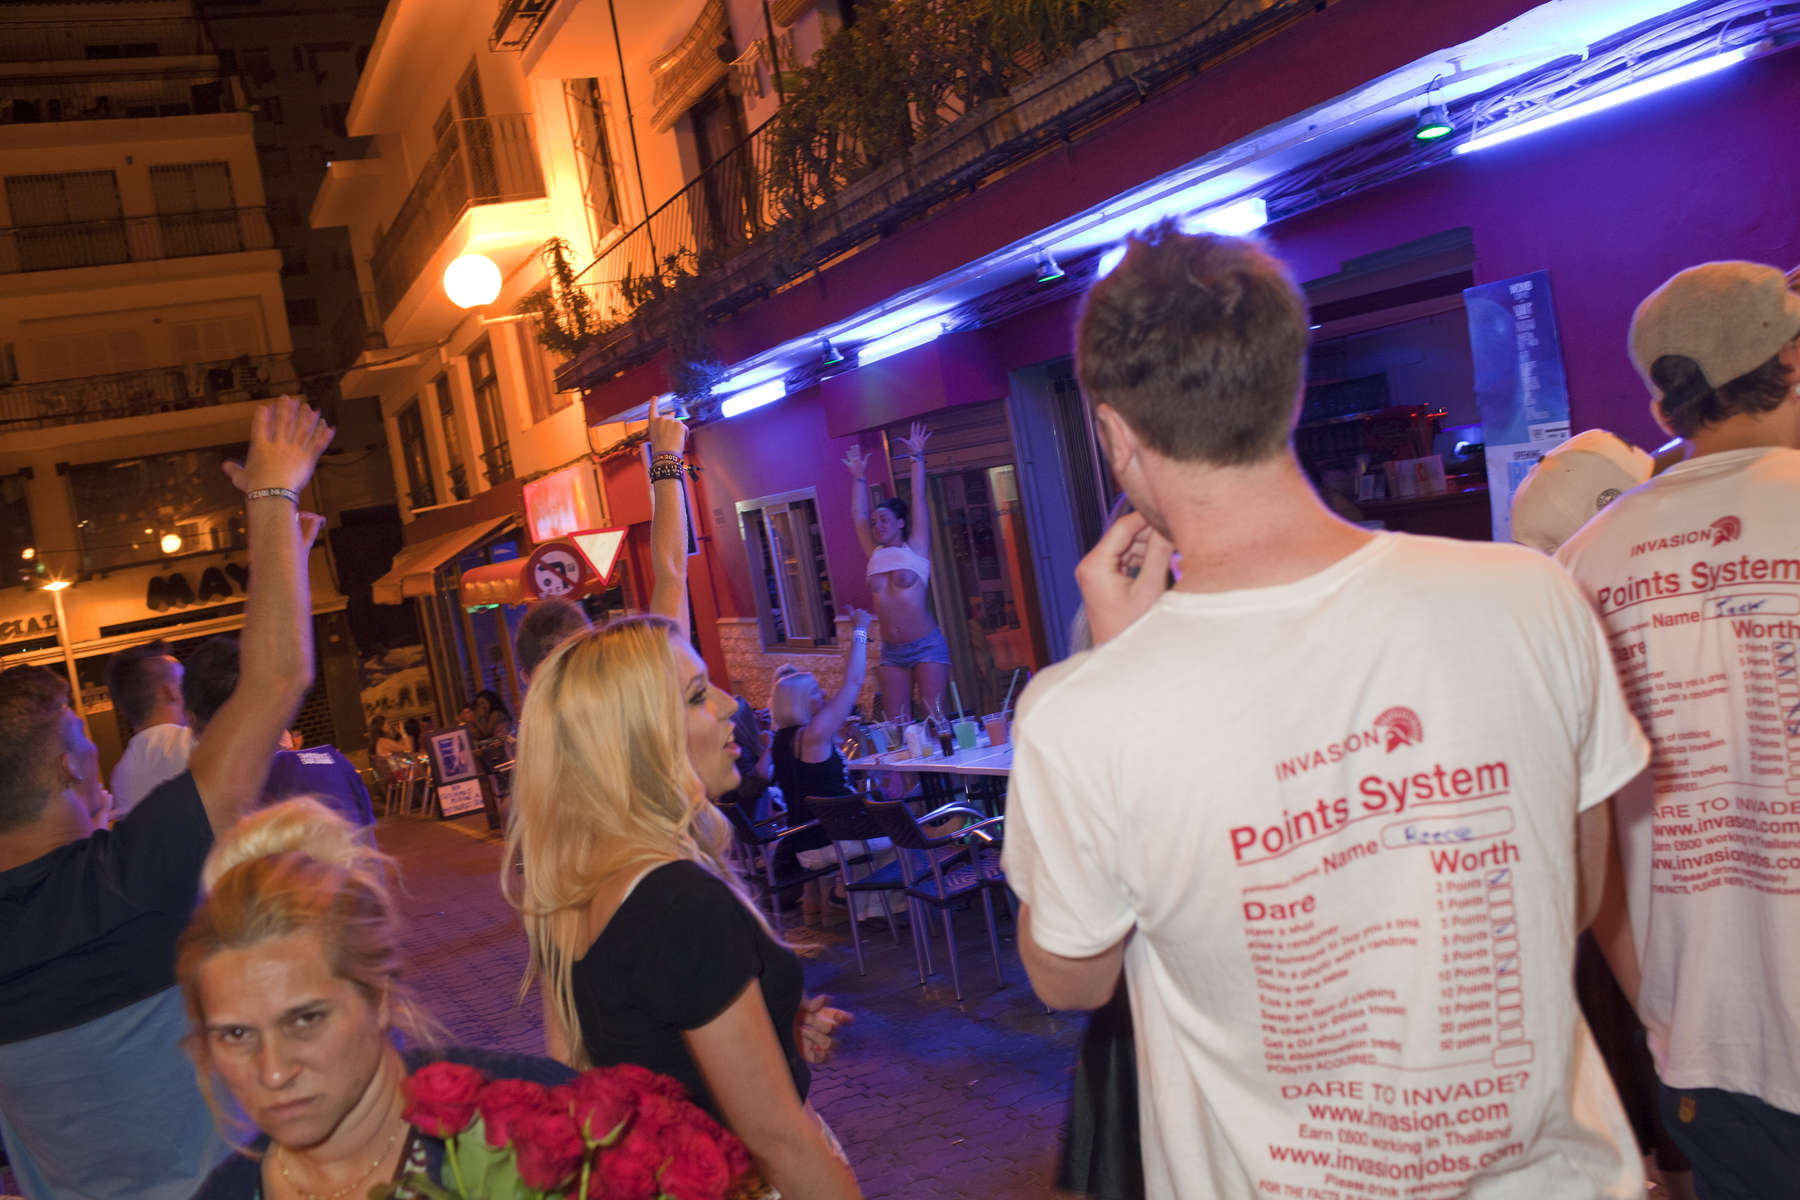 02:16 A British woman flashes her breasts in front of tourists on the Invasion Ibiza bar crawl in the West End area of San Antonio, Ibiza. The fine for shouting in the street, especially at night and not respecting the rest of others is up to €750.